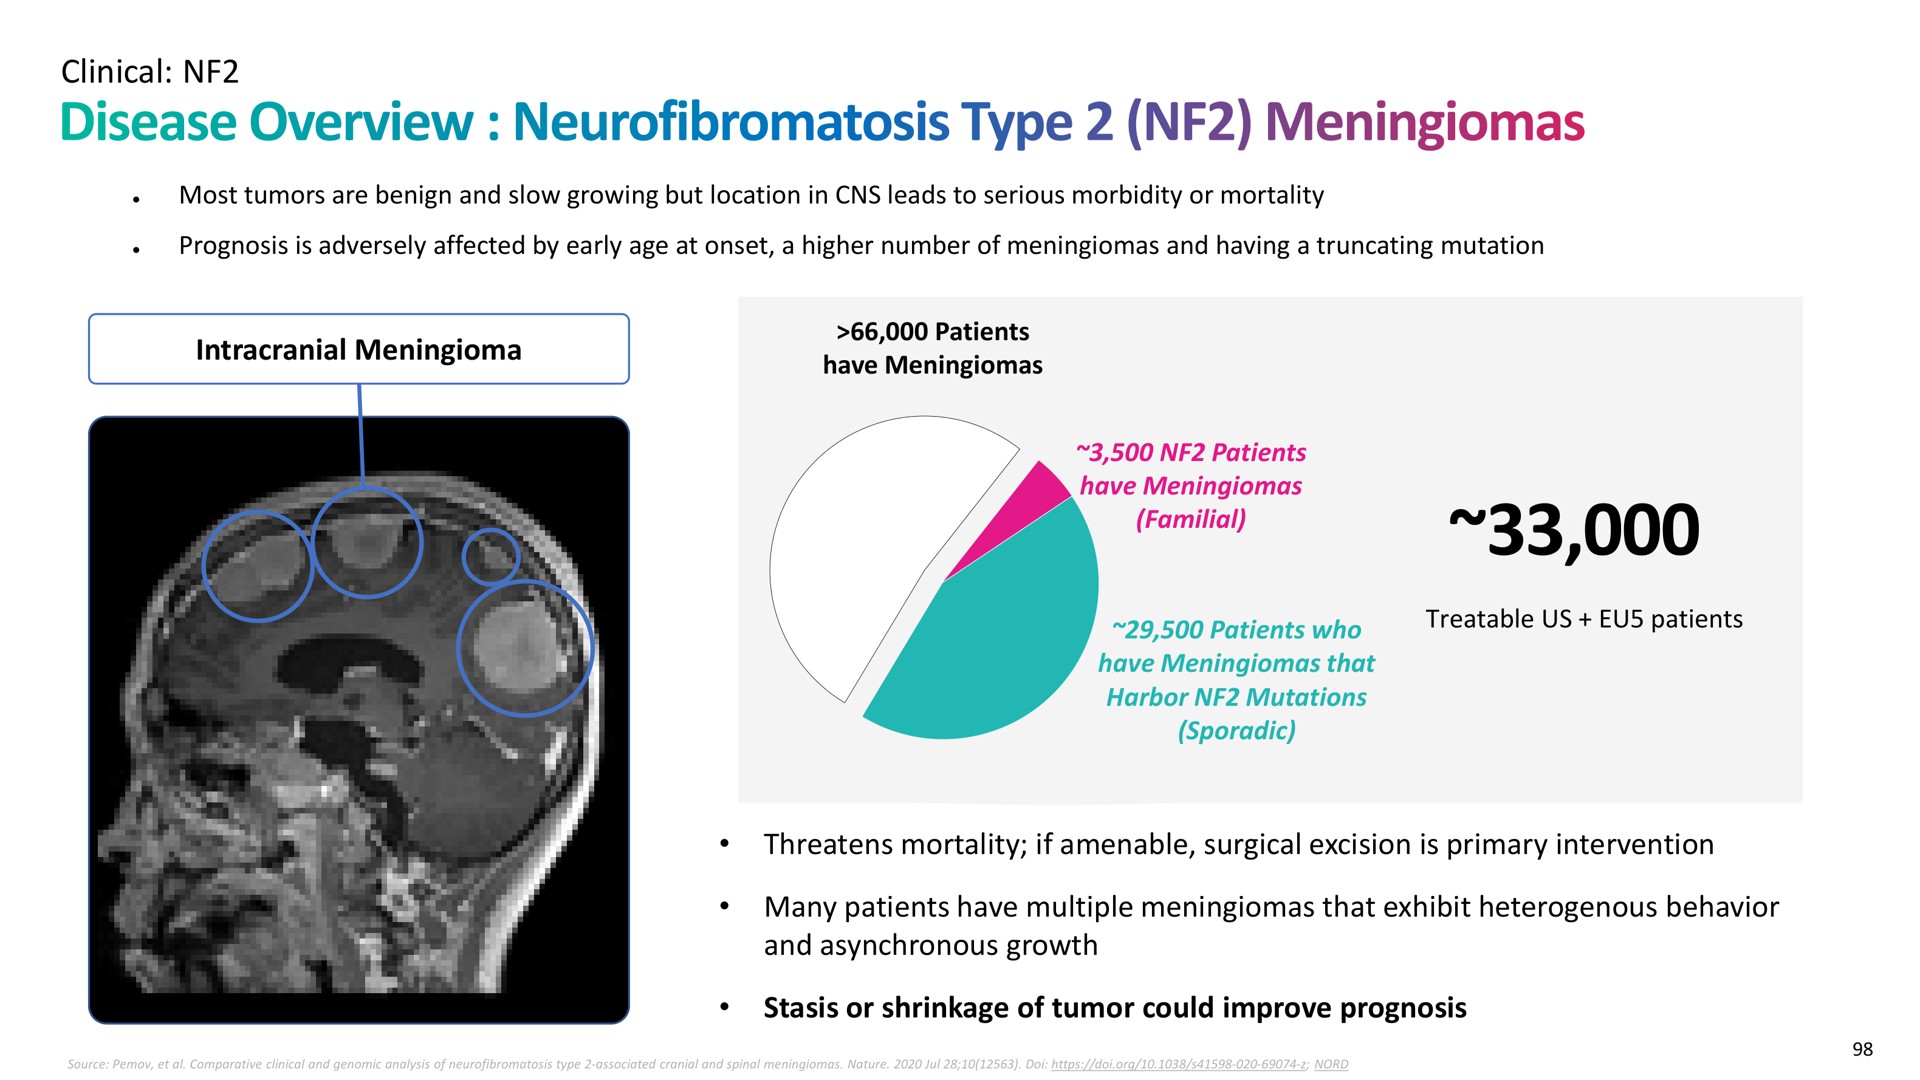 clinical intracranial threatens mortality if amenable surgical excision is primary intervention many patients have multiple that exhibit heterogenous behavior and asynchronous growth stasis or shrinkage of tumor could improve prognosis disease overview neurofibromatosis type | Recursion Pharmaceuticals